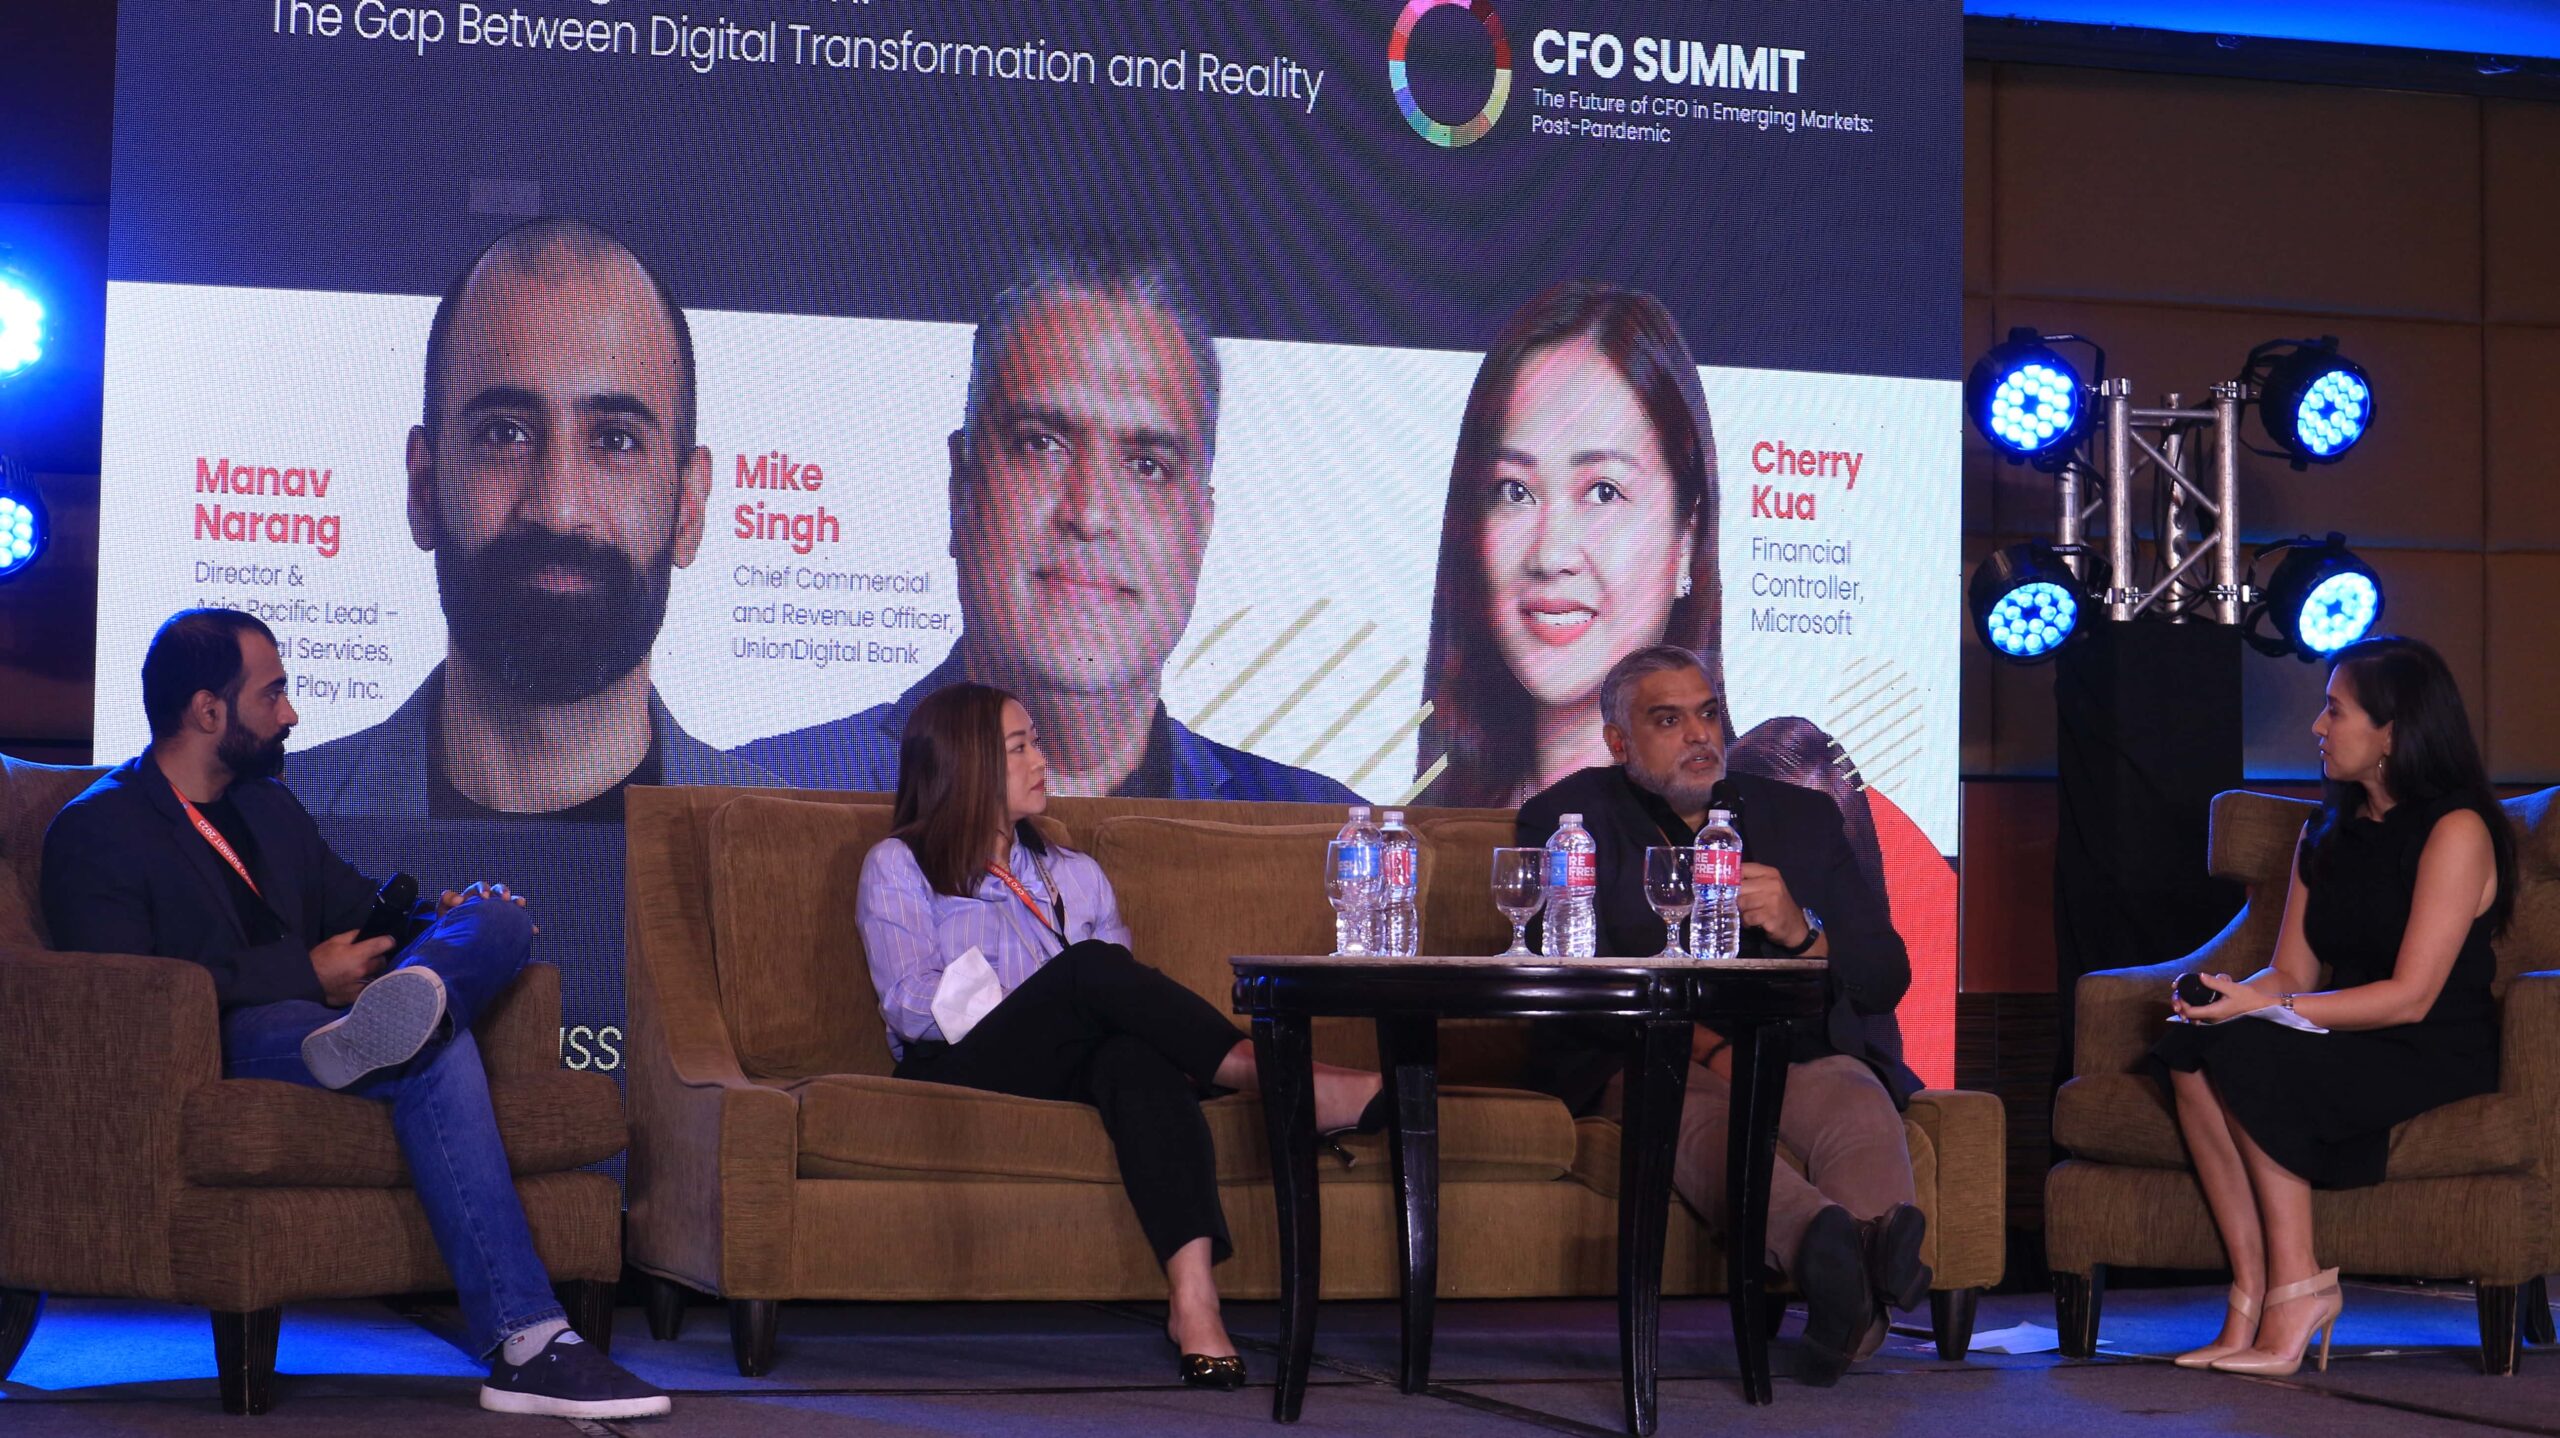 CFO Summit Day 2 with Manav Narang, Cherry Kua, Mike Singh, and Claire Celdran